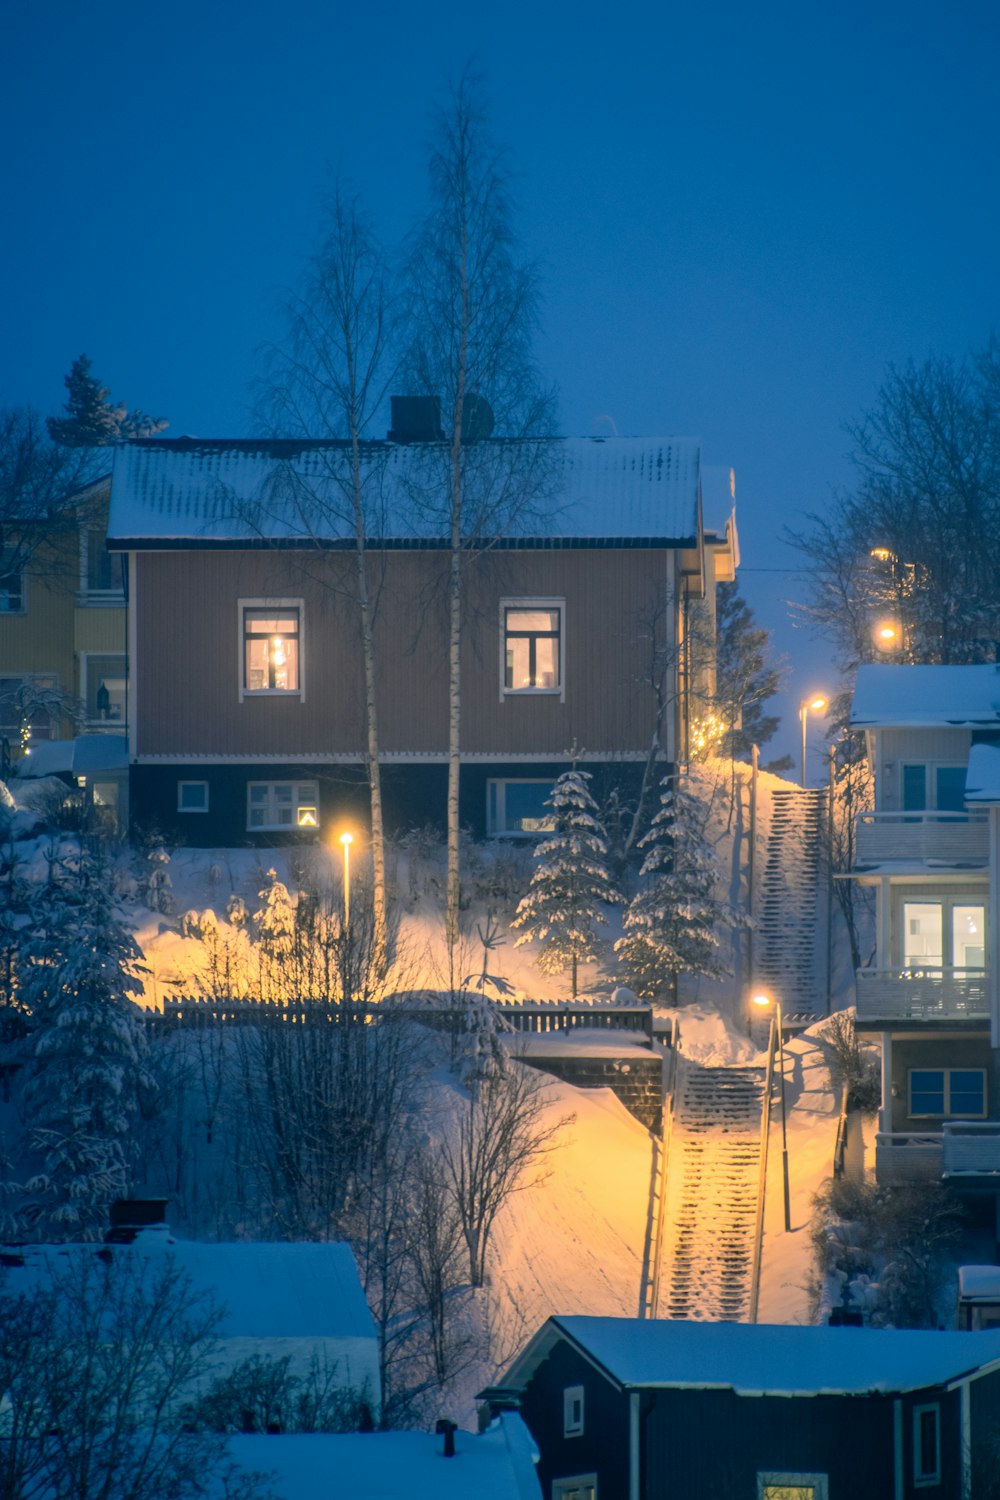 a night scene of a town with snow on the ground